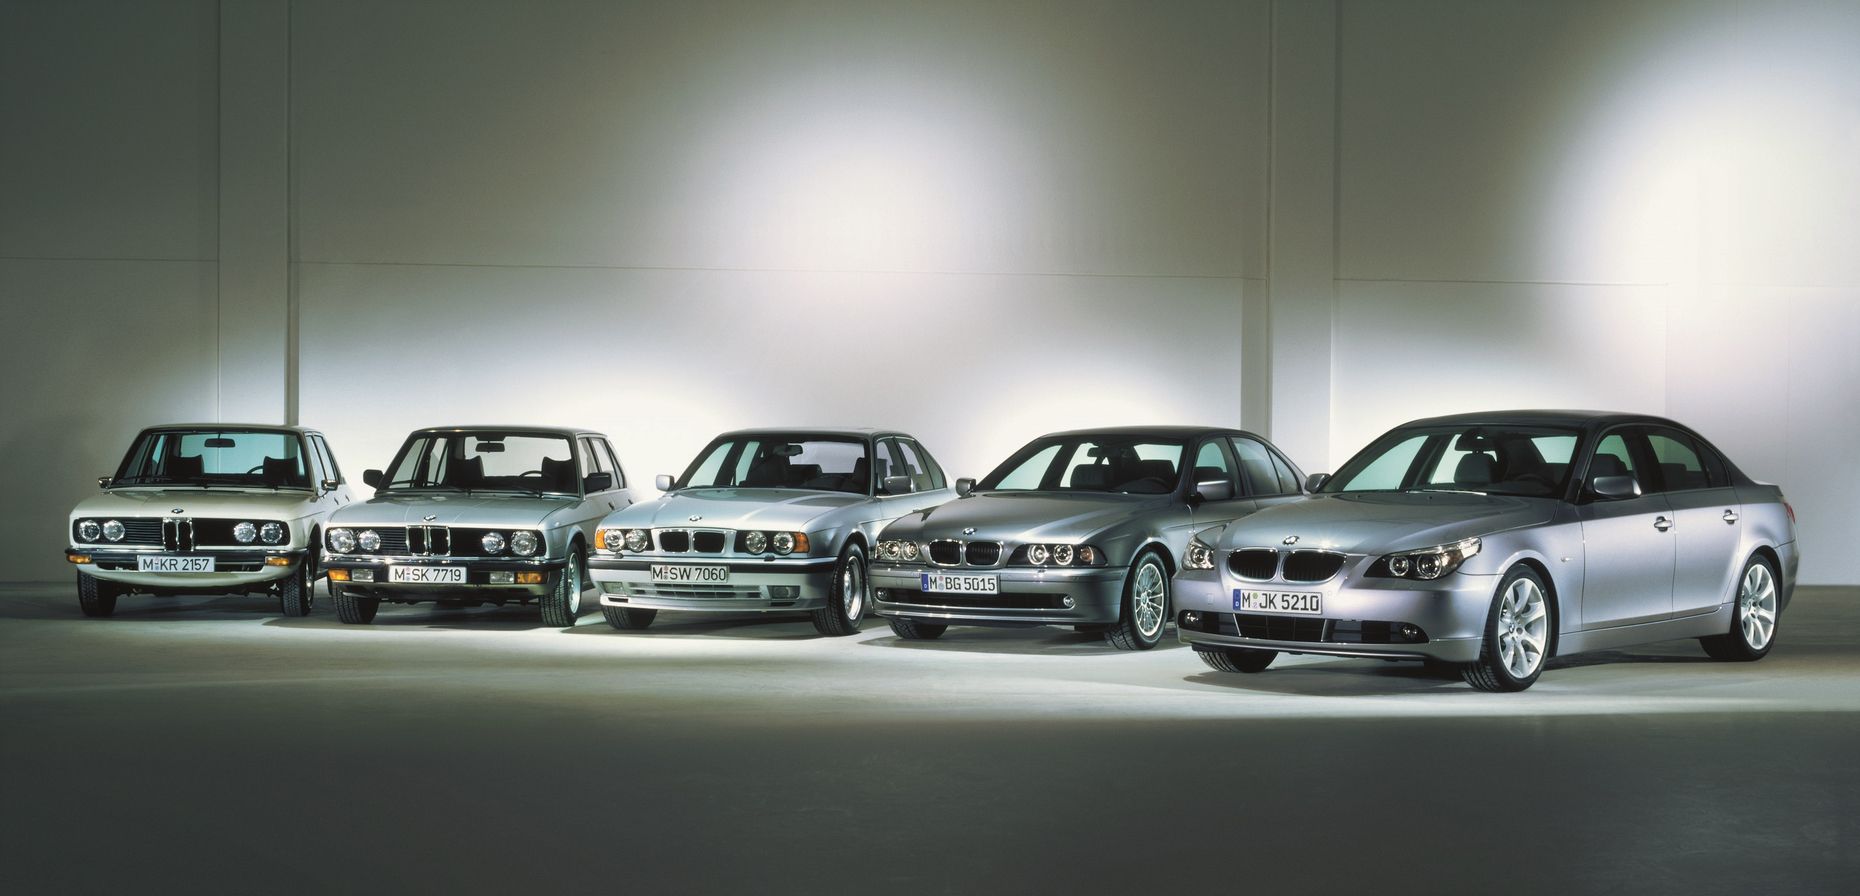 Generation Gap: Ranking each and every version of the BMW 5 Series